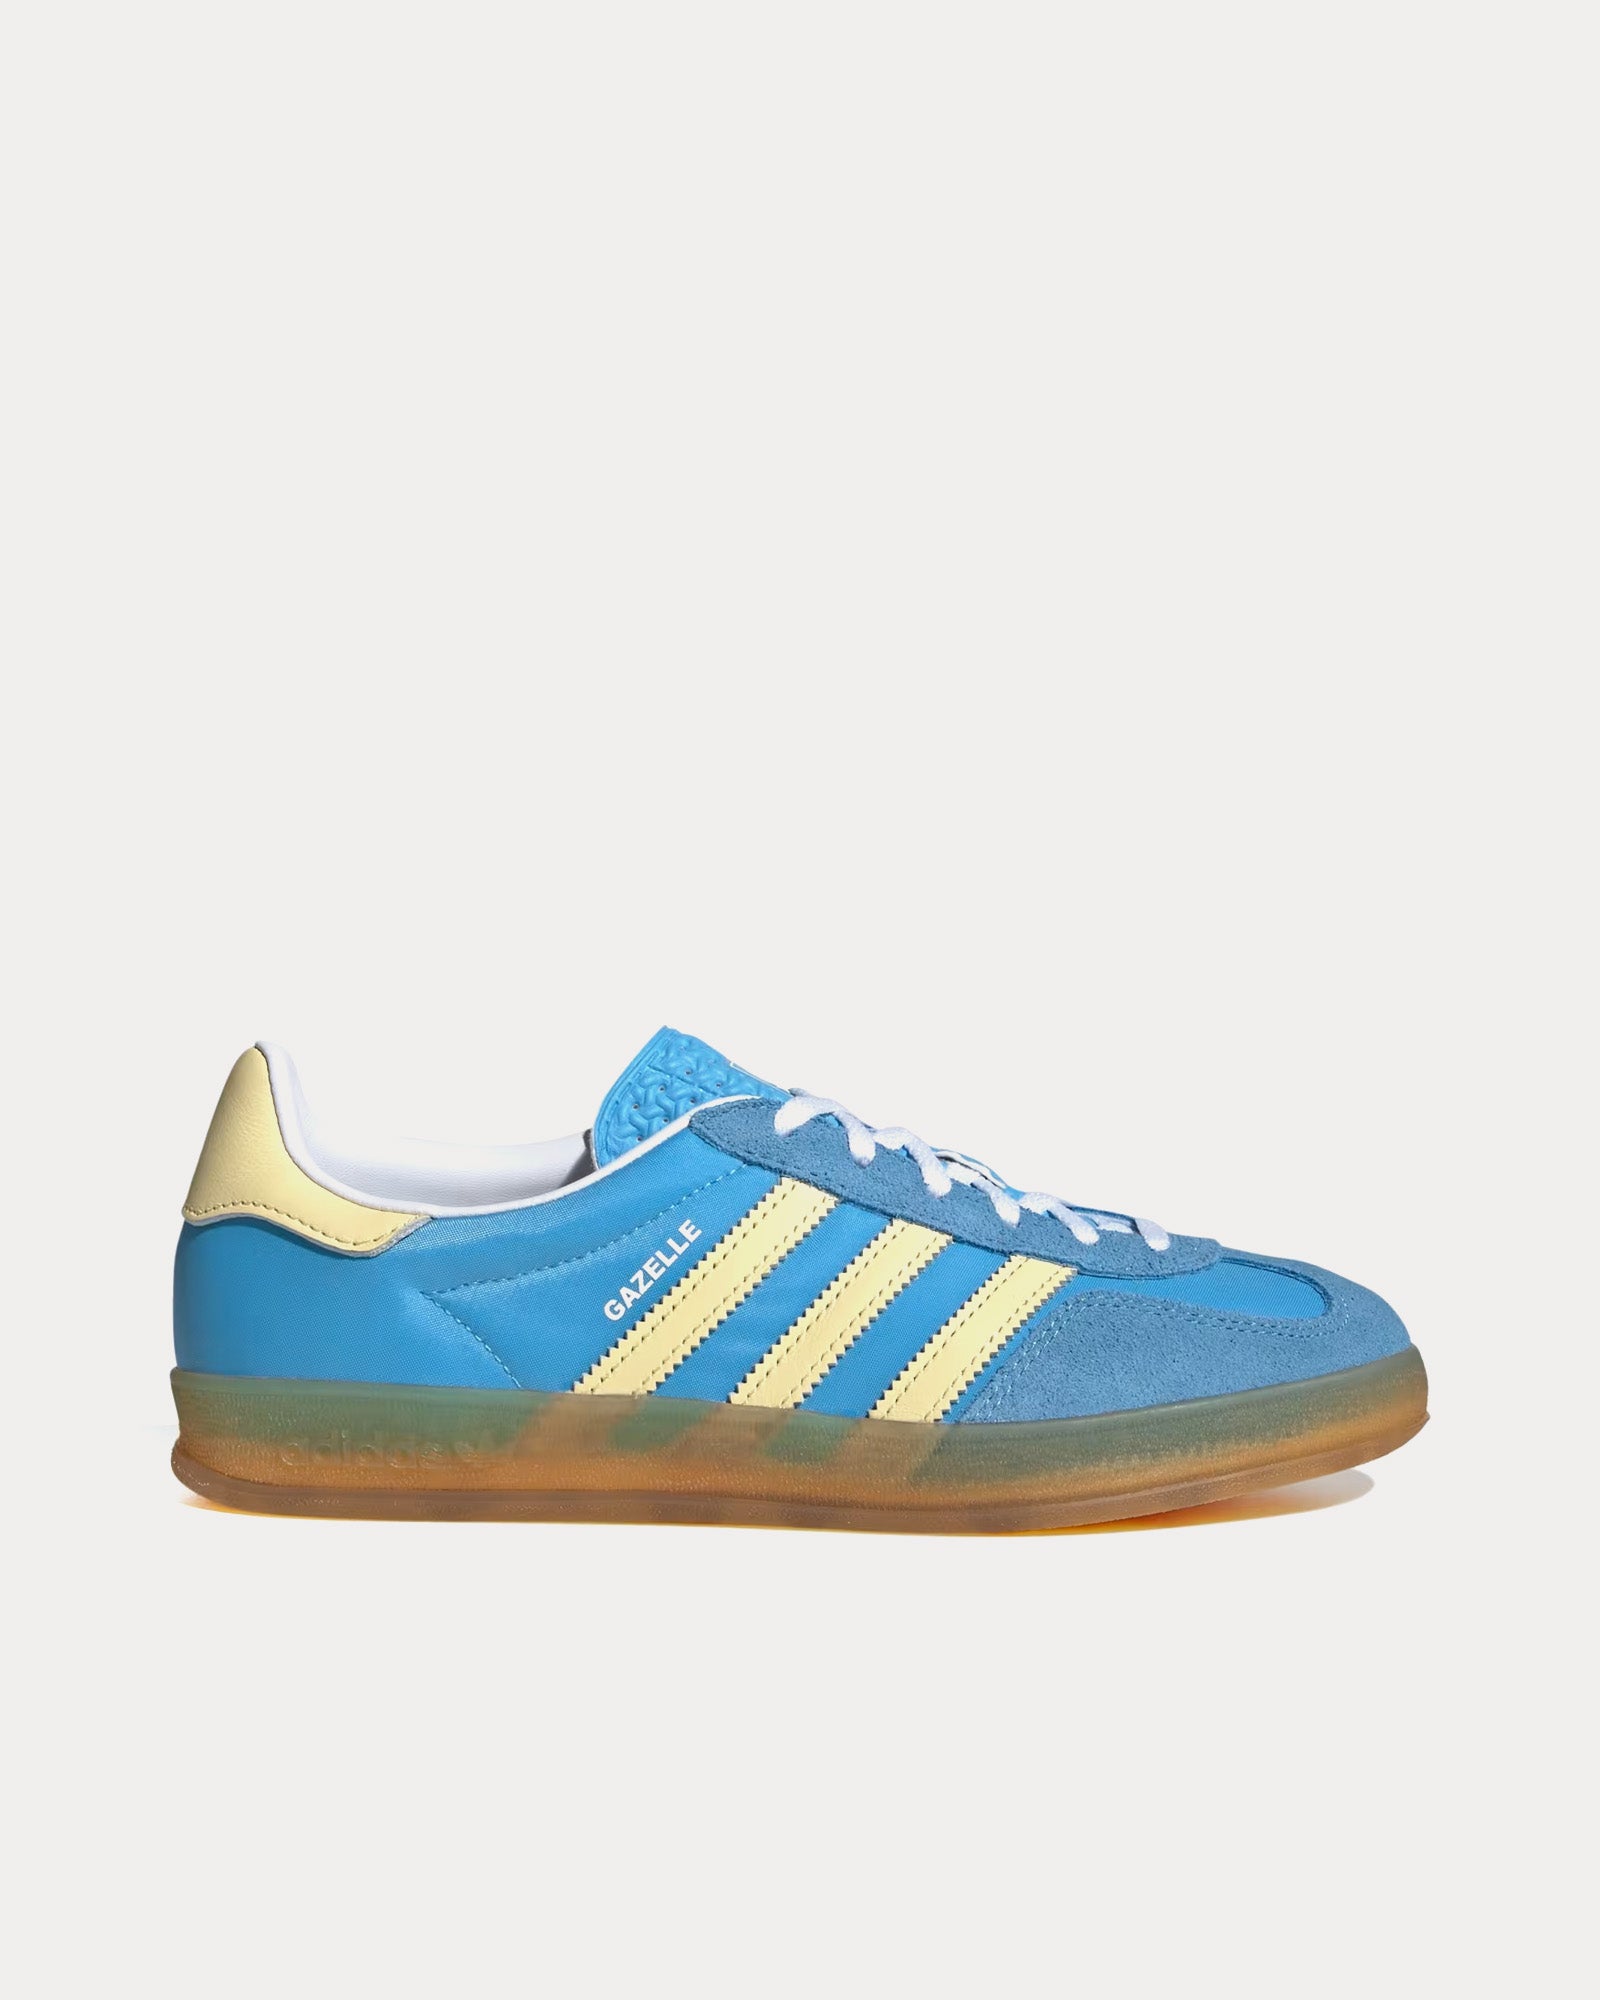 Adidas - Gazelle Indoor Semi Blue Burst / Almost Yellow / Cloud White Low Top Sneakers